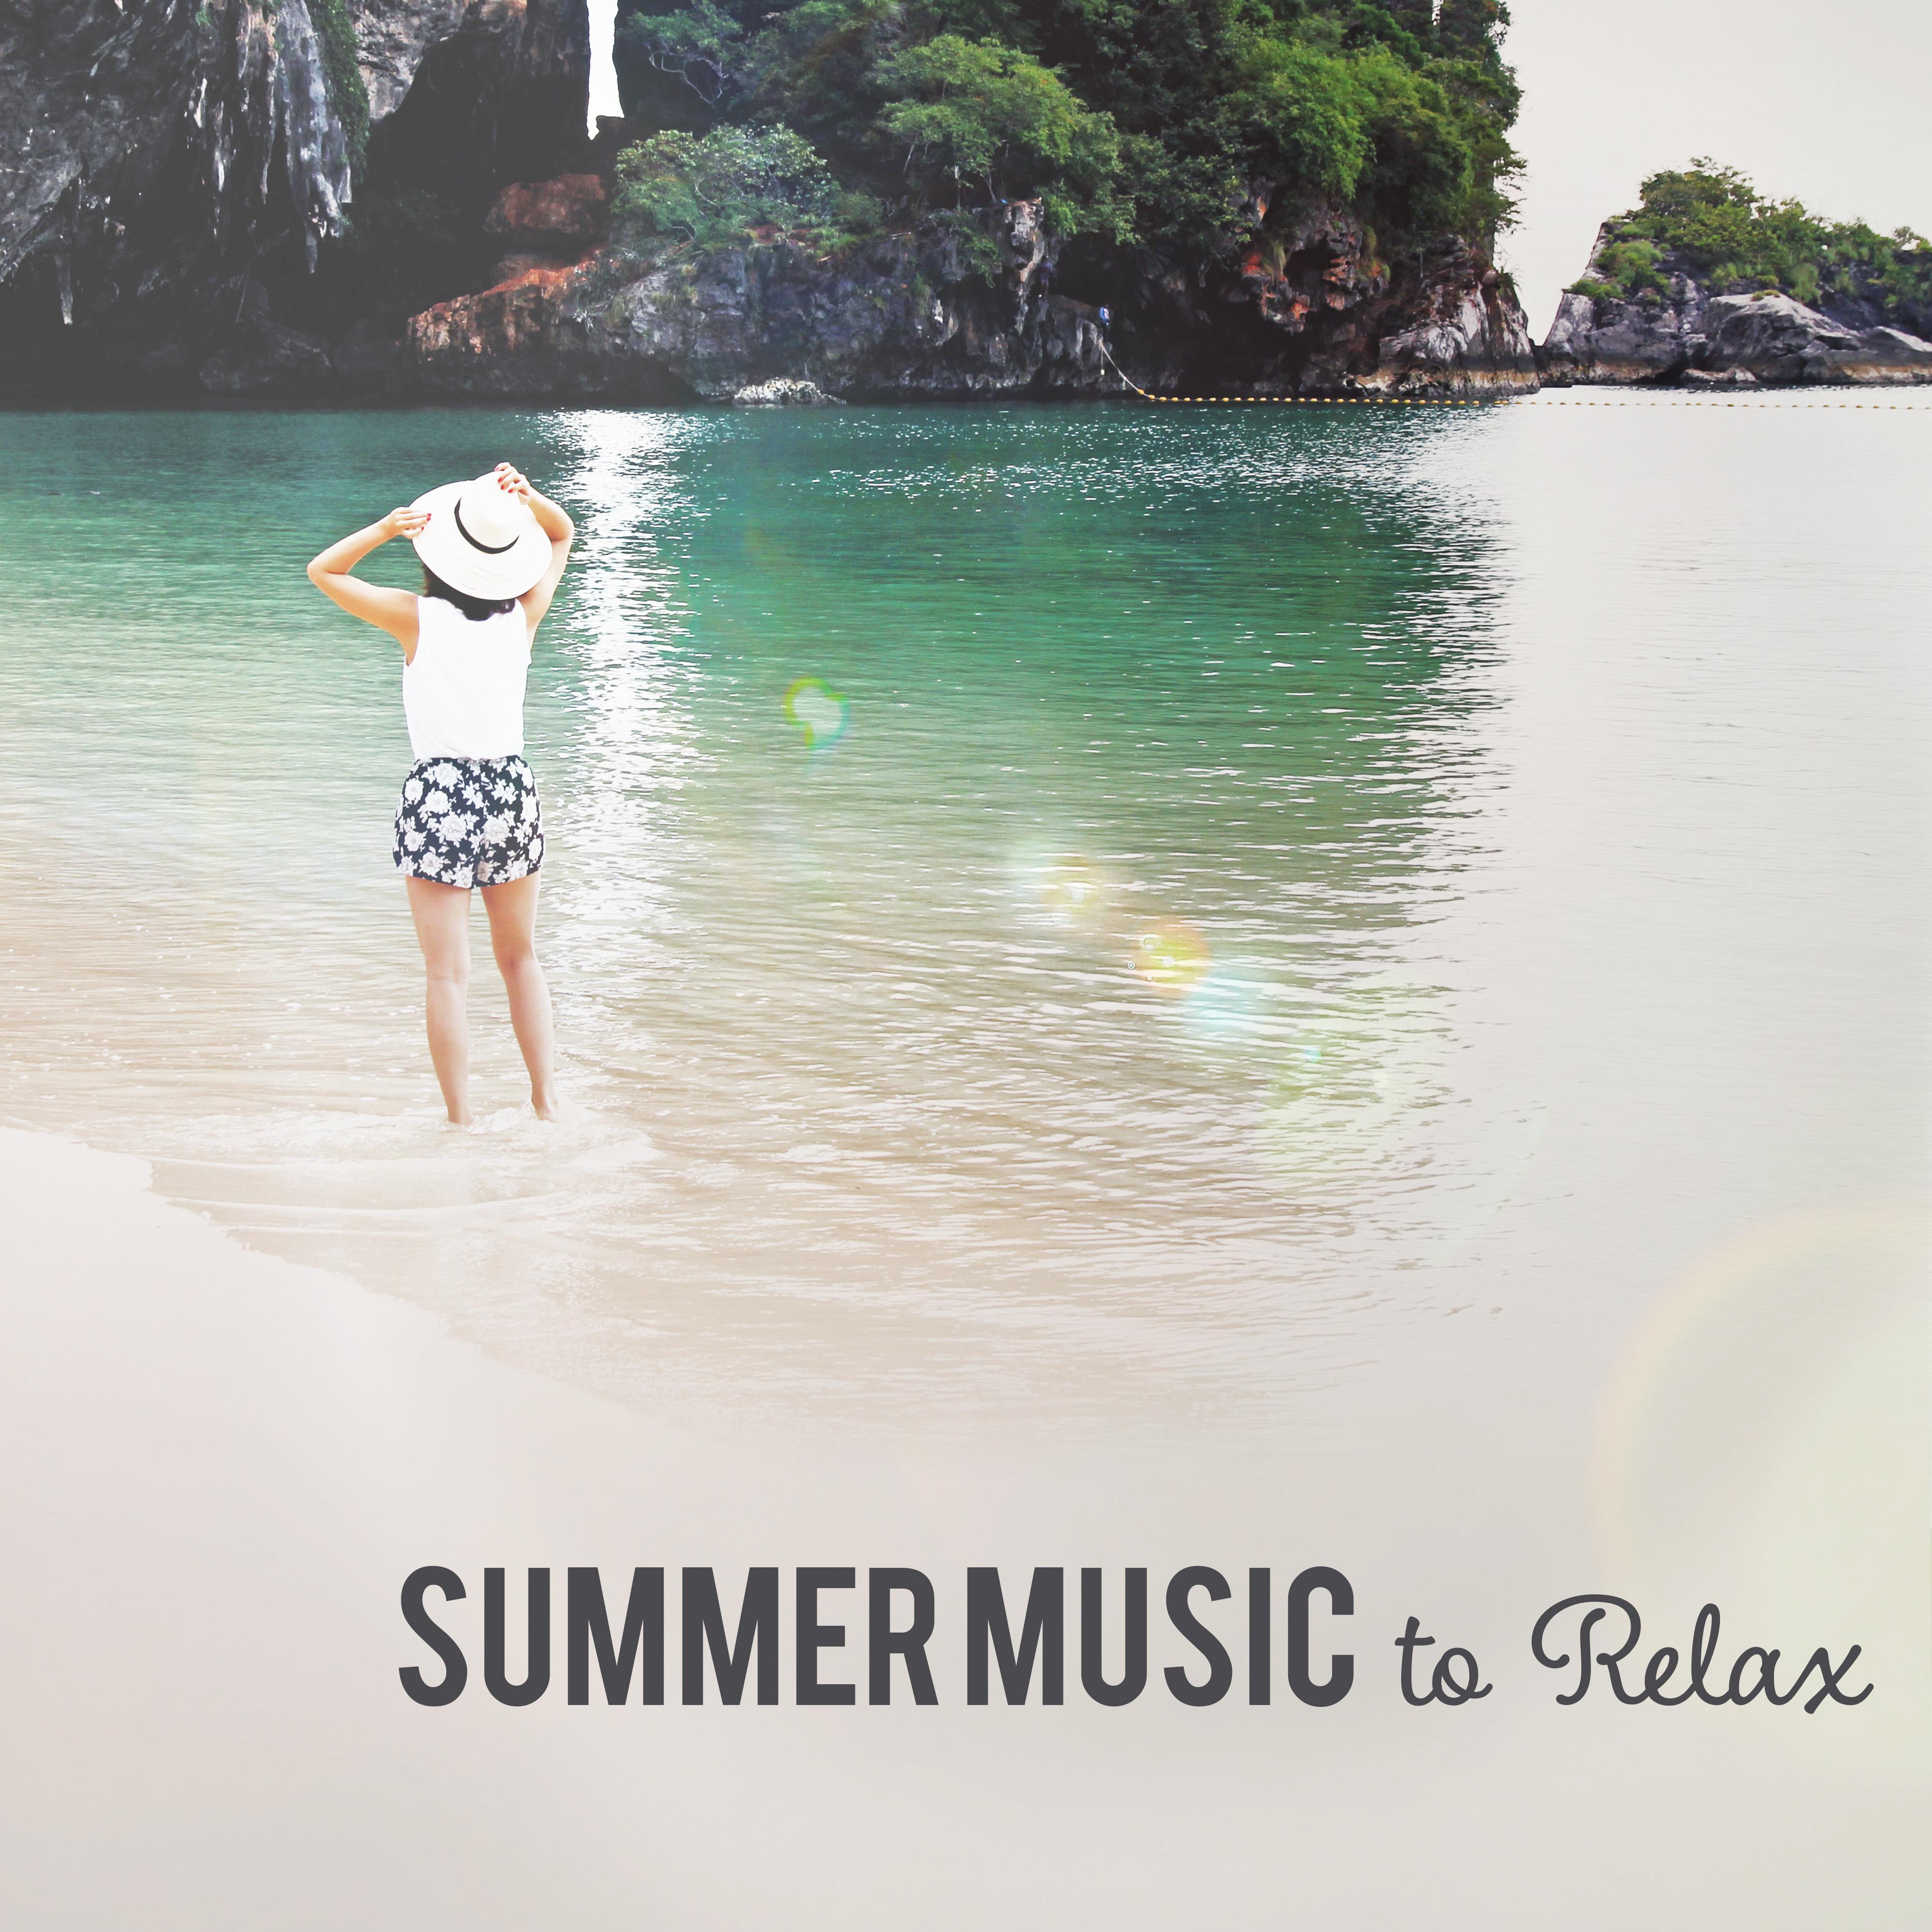 Summer Music to Relax – Chill Out Music, Relaxing Time on Island, Tropical Sounds, Beach Lounge